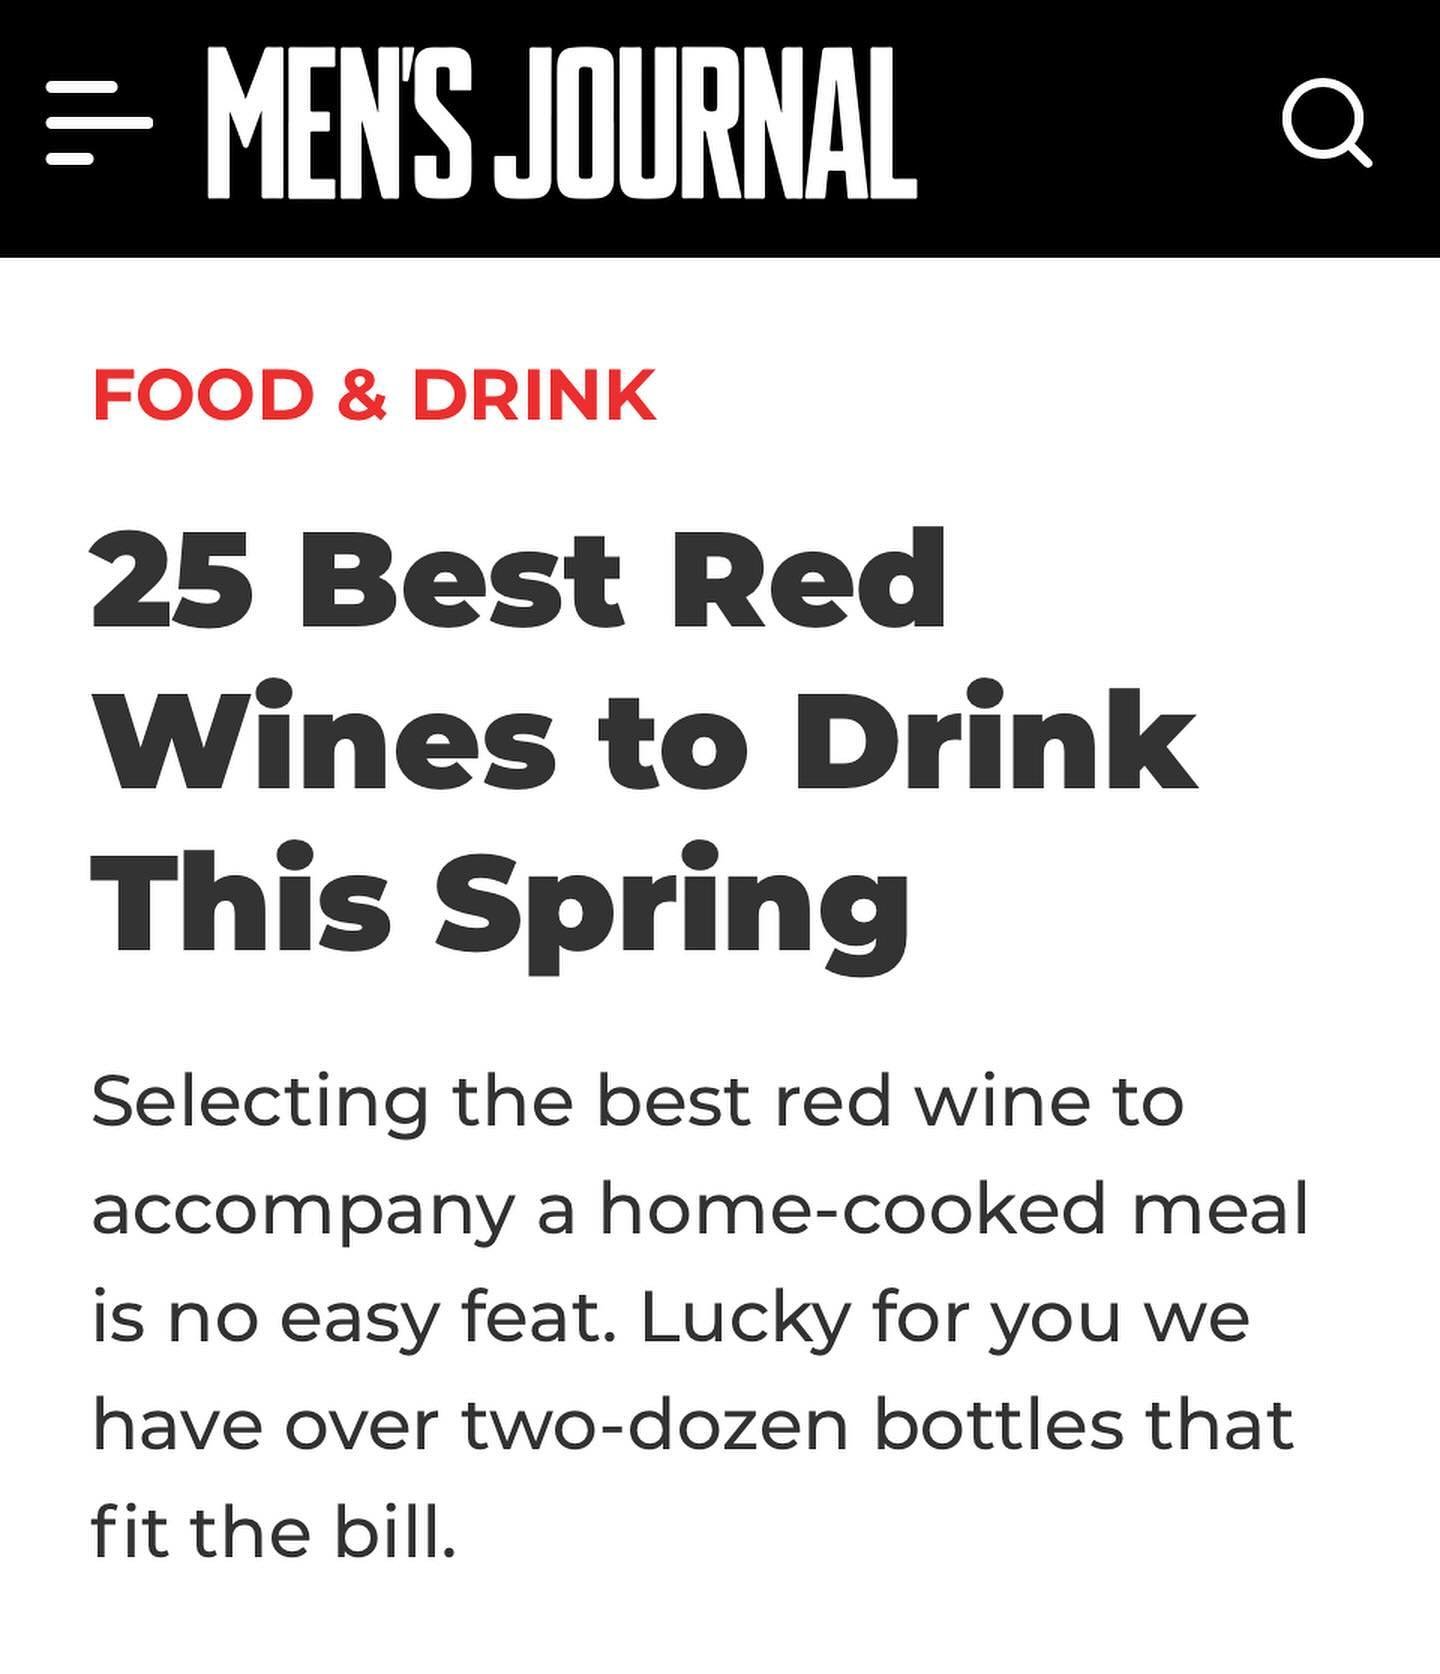 🍷Check out my two picks for the &ldquo;25 Best Red Wines to Drink This Spring&rdquo; in @mensjournal 🍷 Both are  under $25 on @wine_com :

@aubonclimatwine 2022 Santa Barbara Pinot Noir $24.99

@domainedansignan 2021 Petites Grappes C&ocirc;tes du 